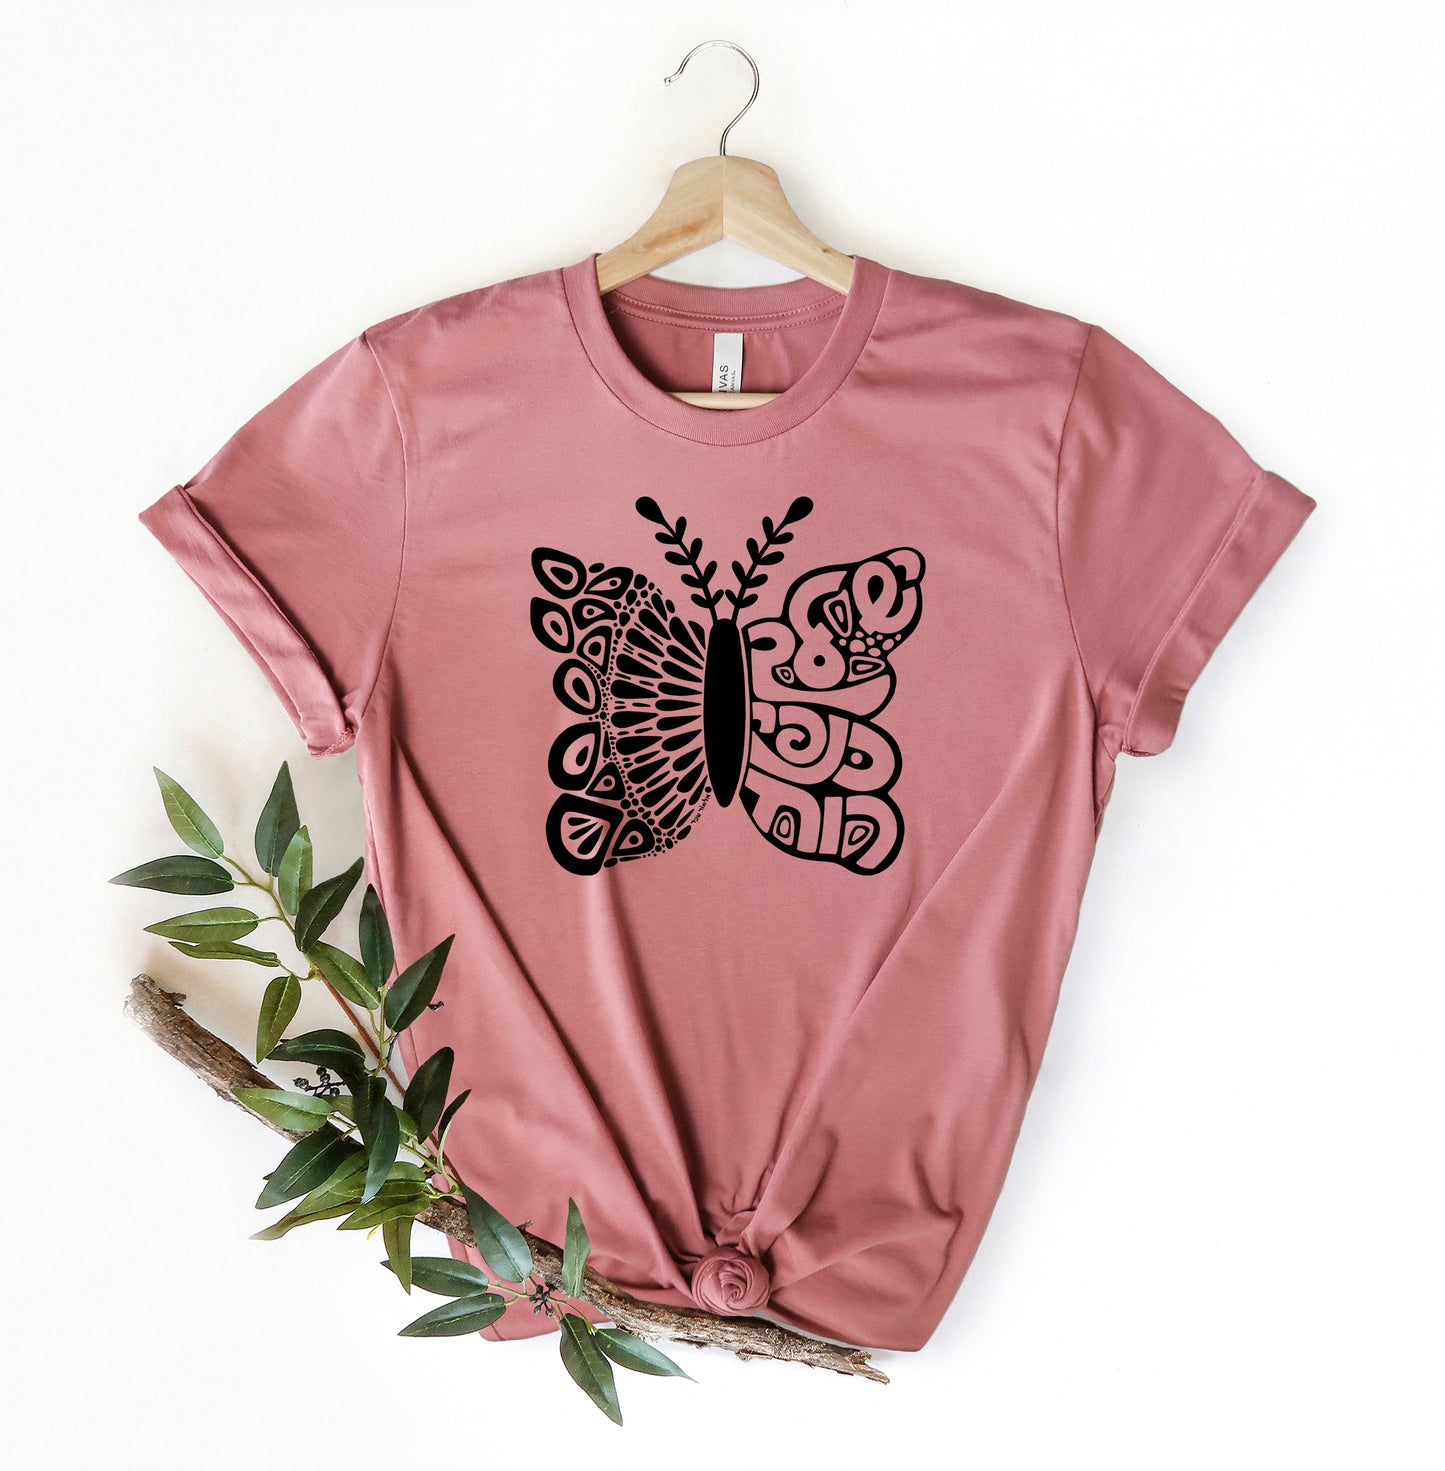 "You have wings of the spirit" Unisex t-shirt